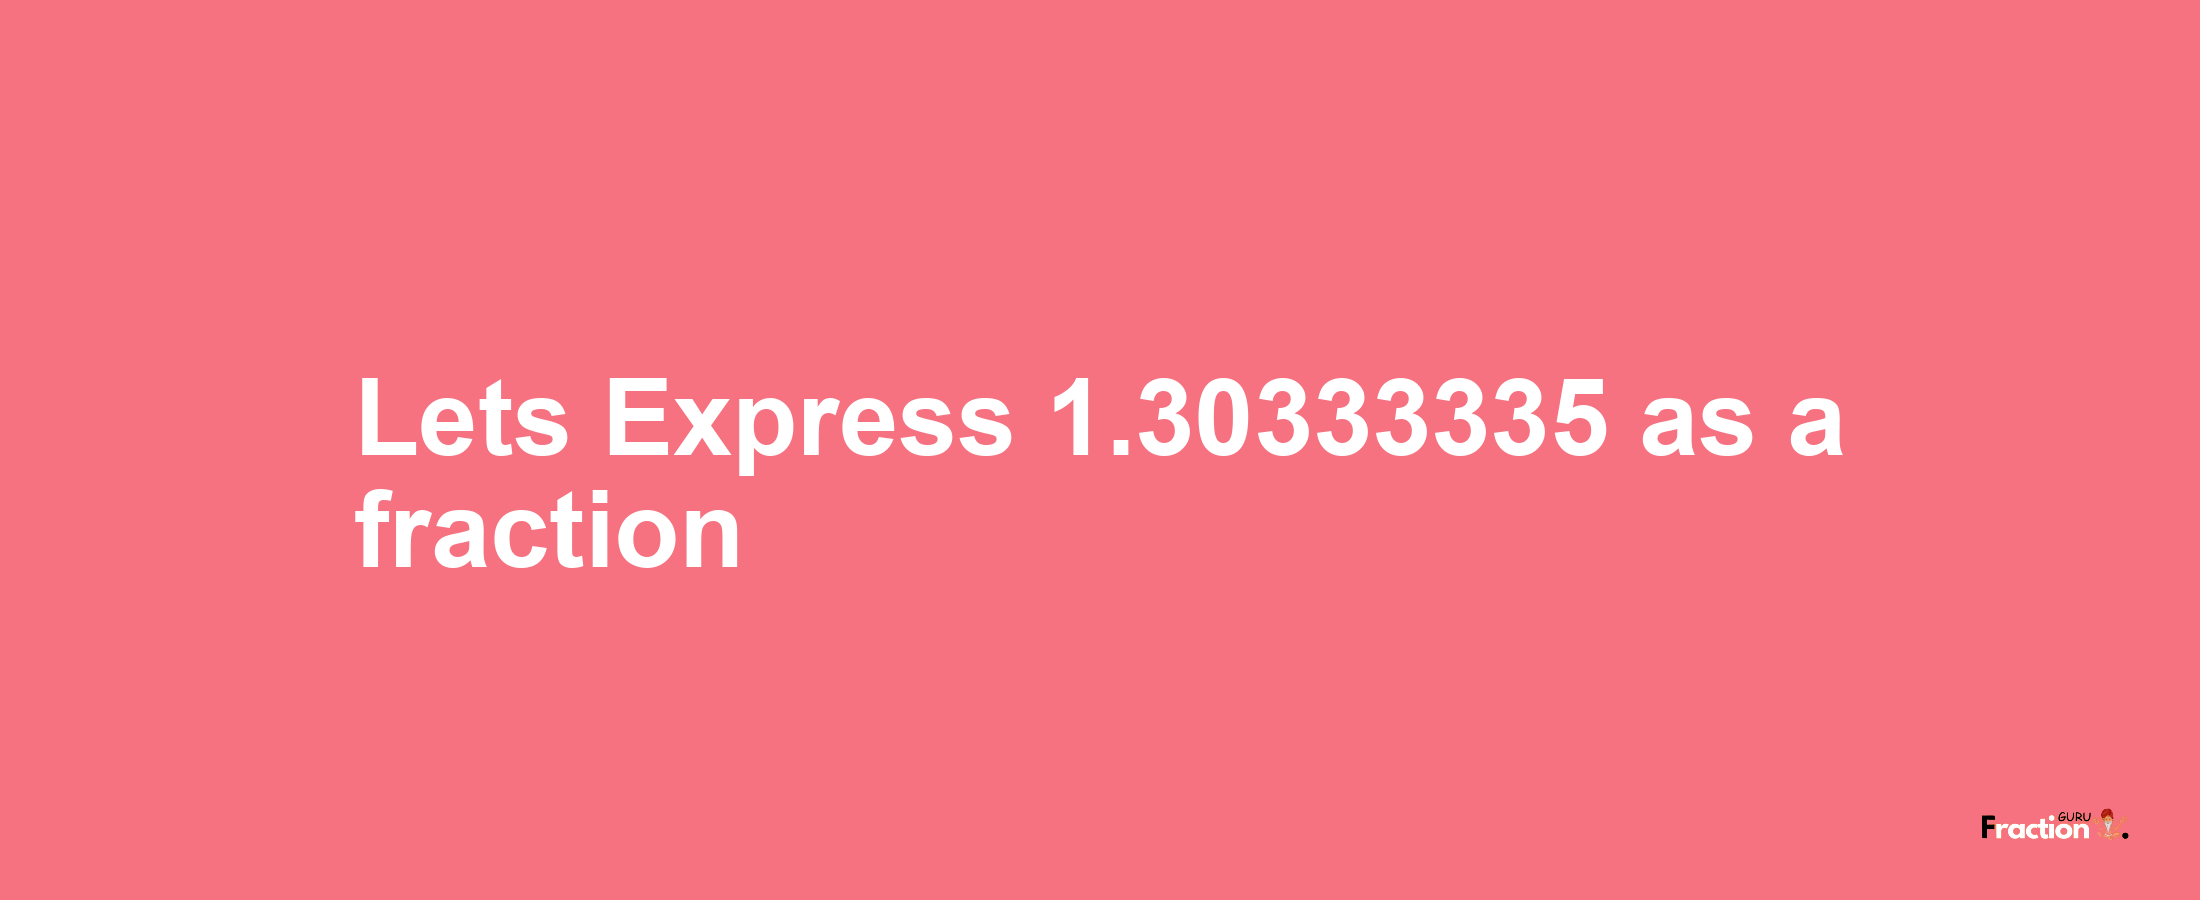 Lets Express 1.30333335 as afraction